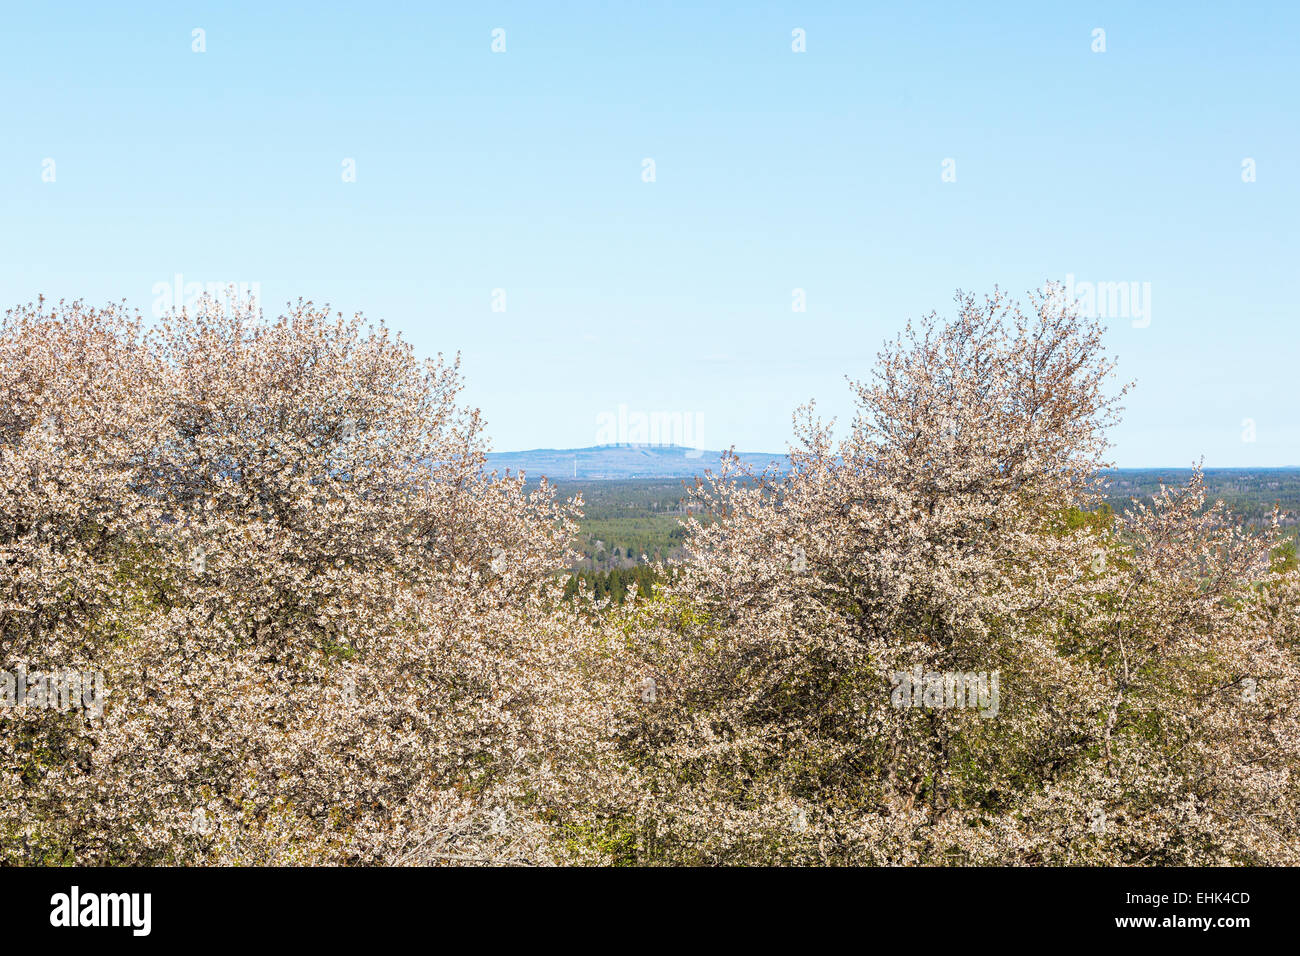 View of flowering cherry tree with Kinnekulle on the horizon at spring, in Sweden Stock Photo